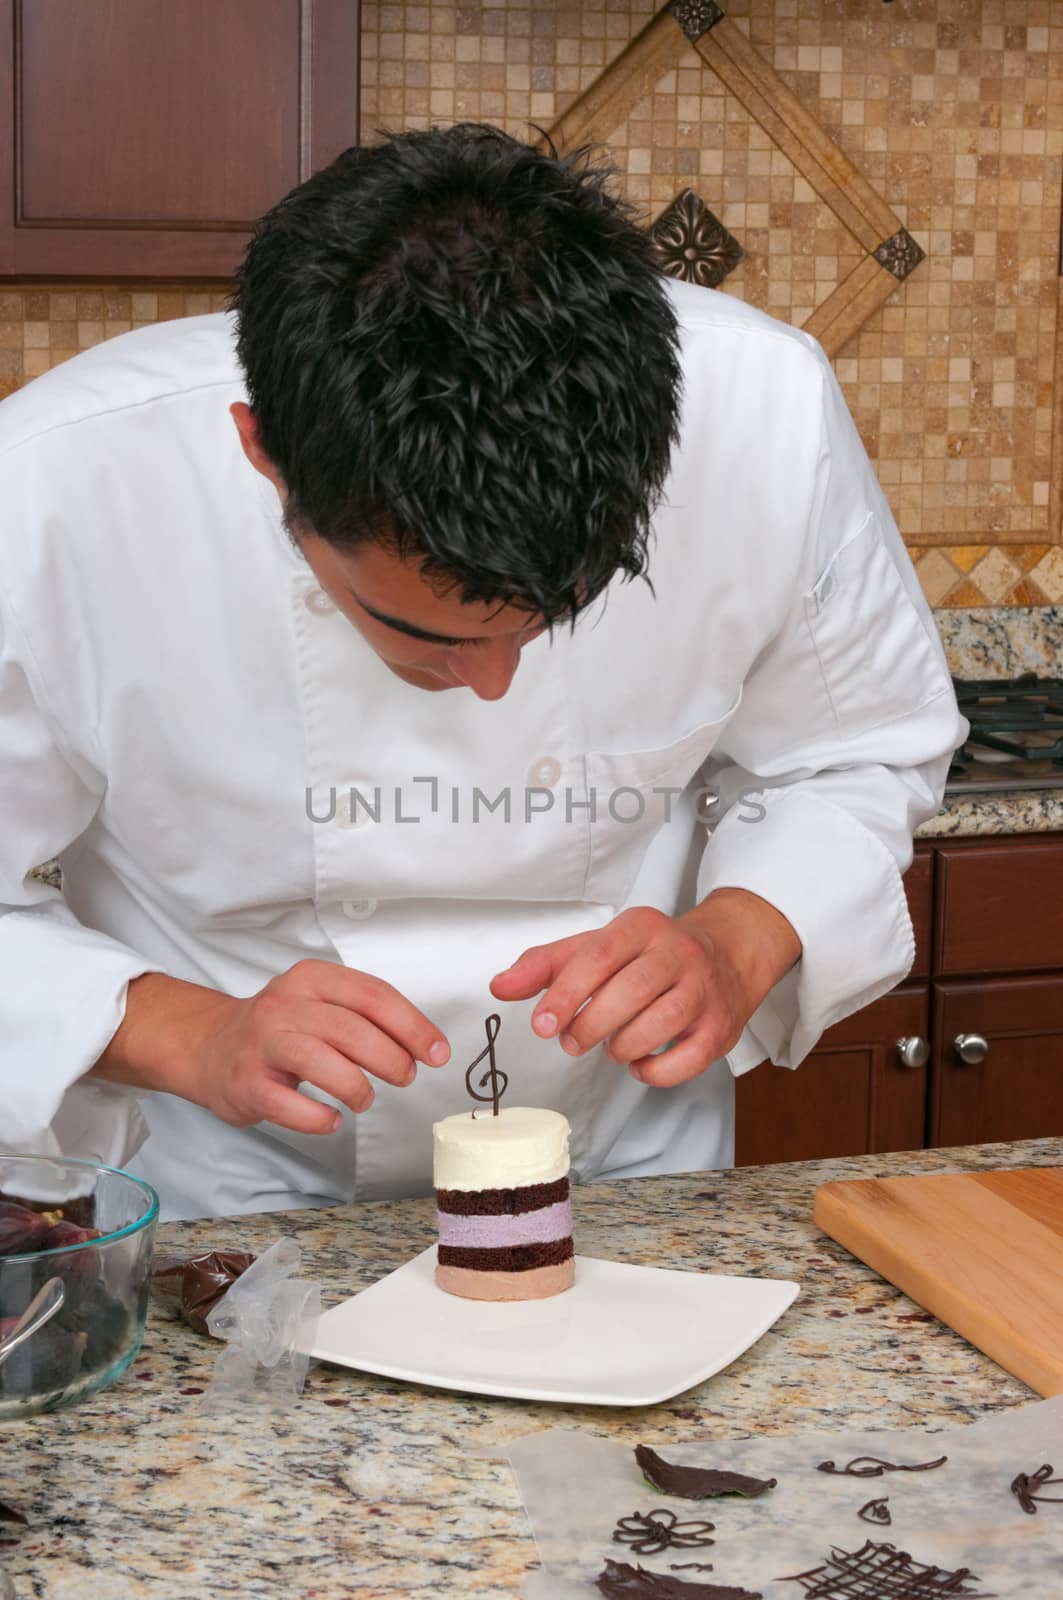 Chef making mousse cake and decorating